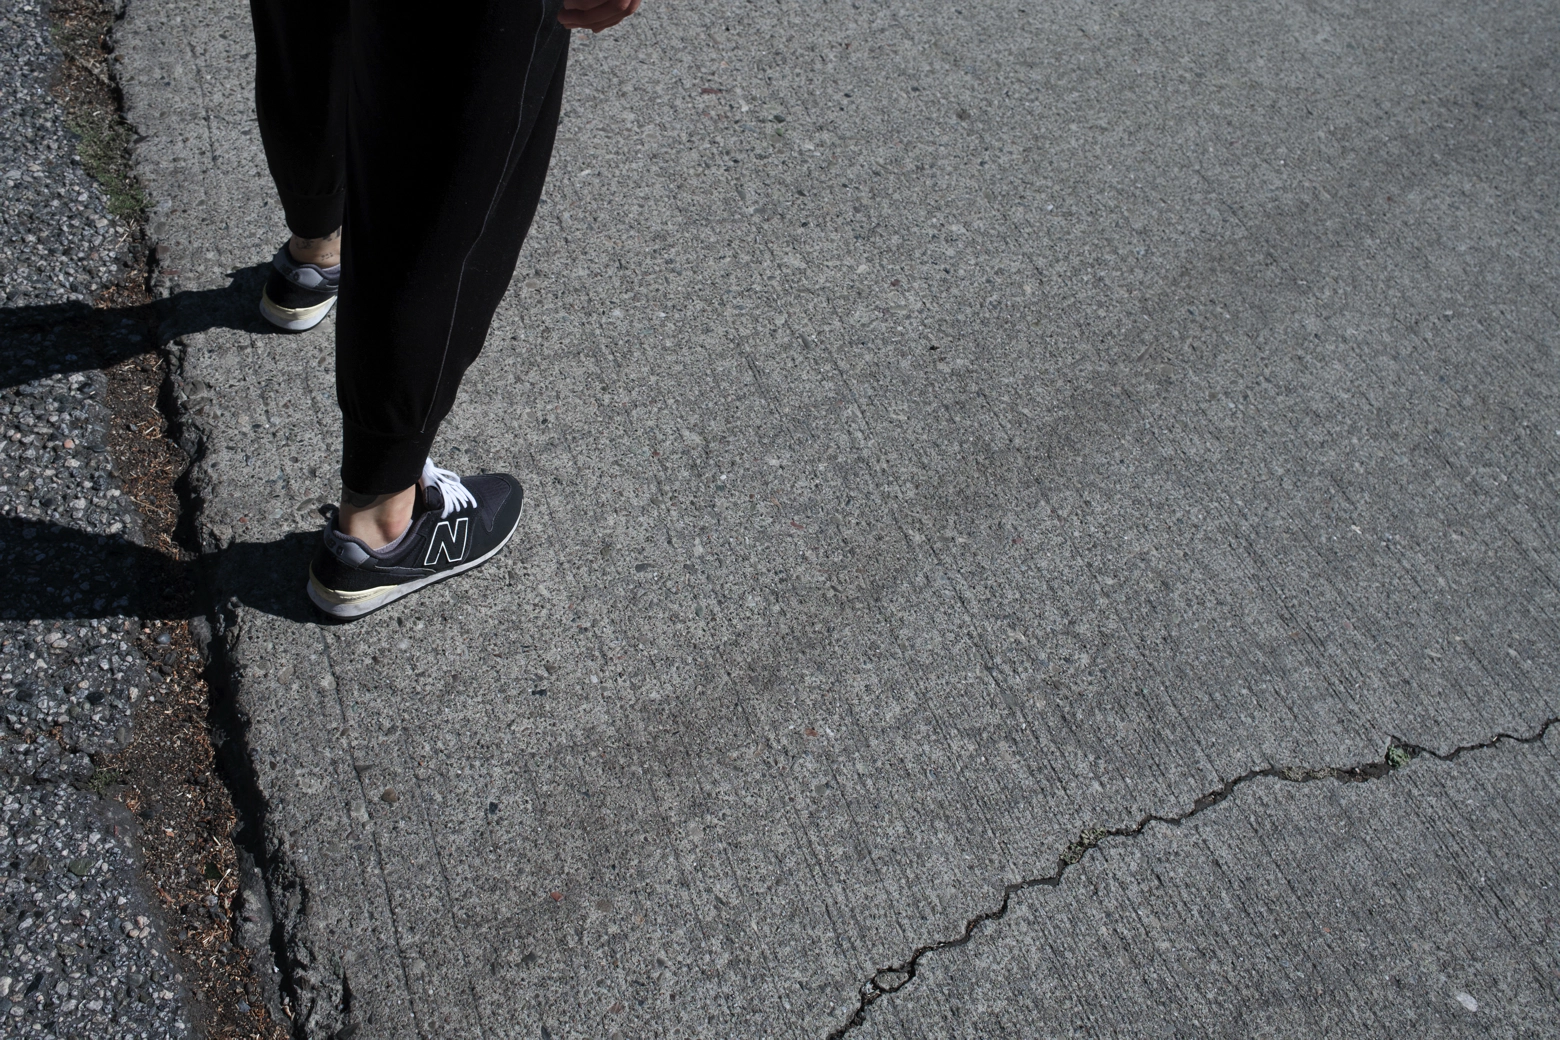 A person stands on a cracked pavement